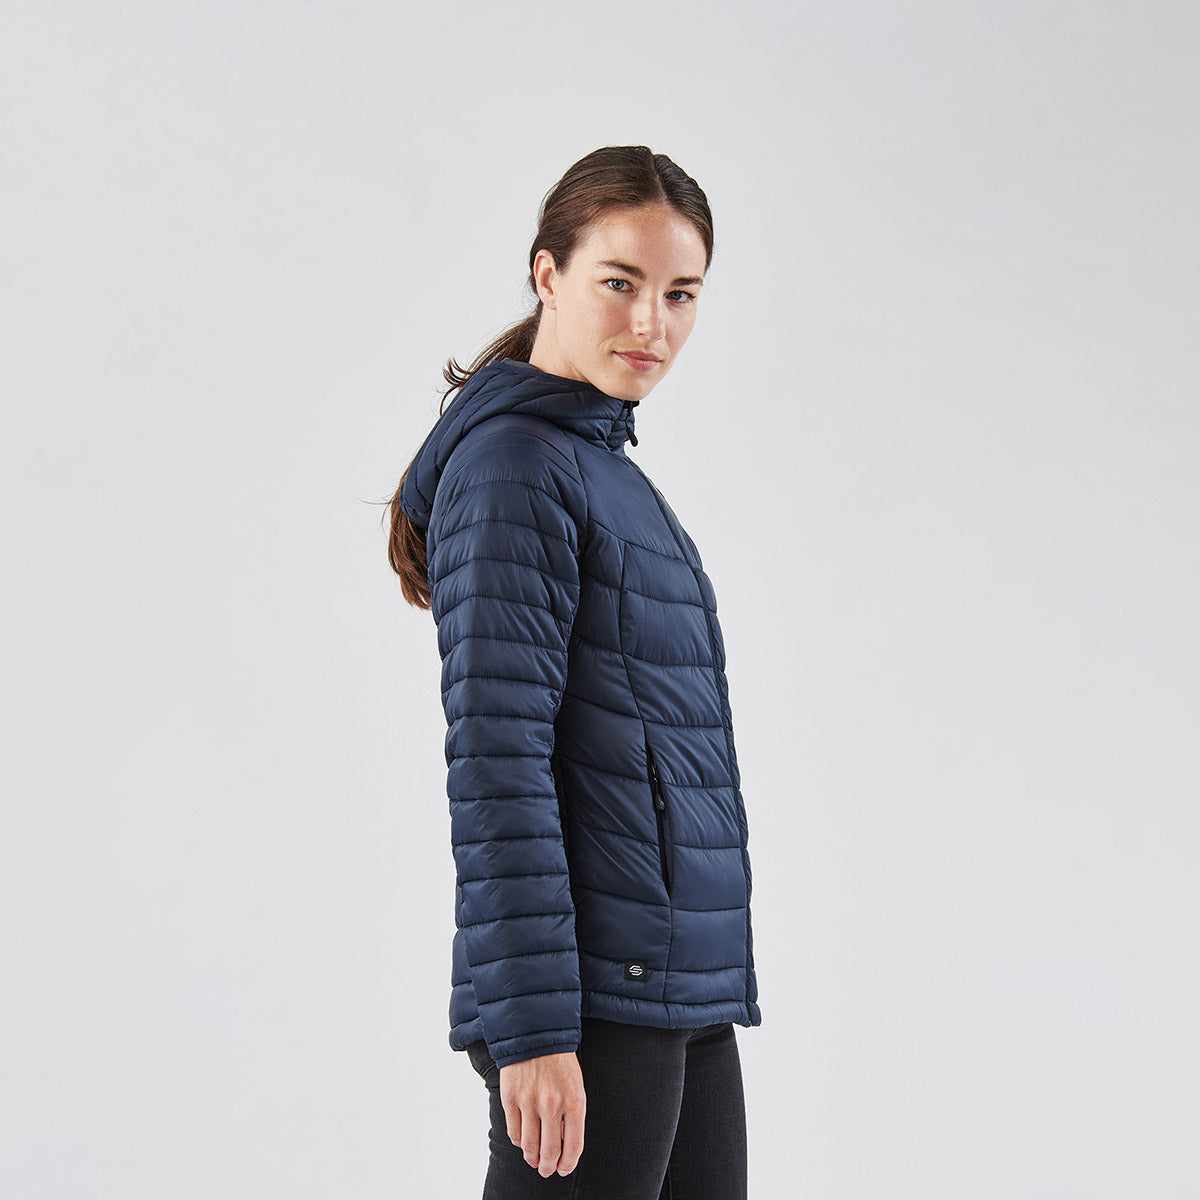 In 30 Seconds or Less: Lululemon's Down For it All Jacket